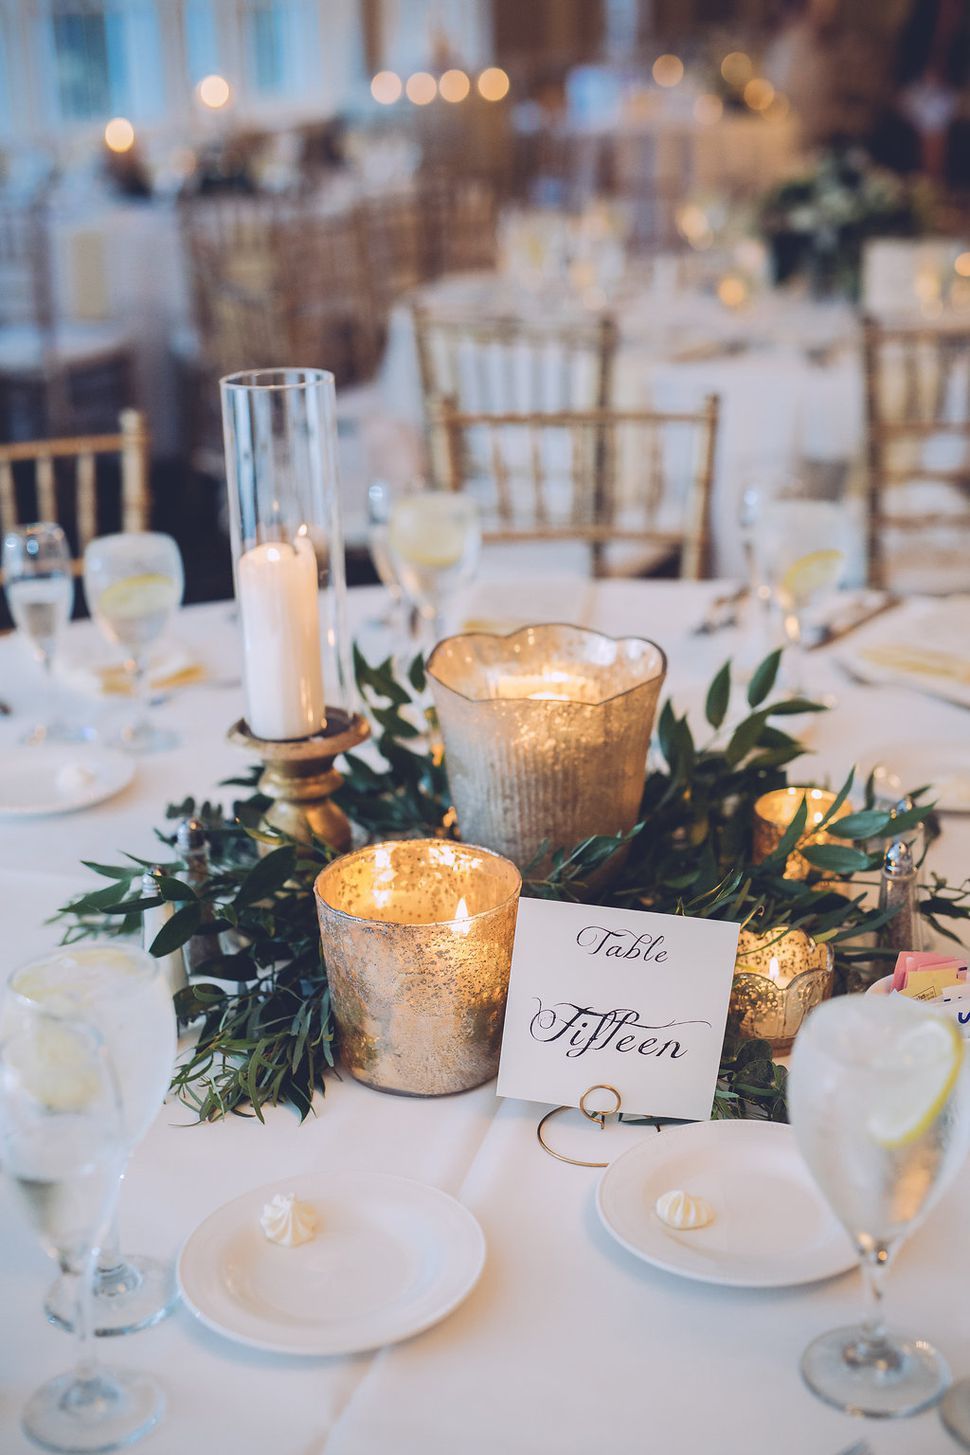 Budget-friendly Greenery Wedding Décor Ideas You Can’t Miss